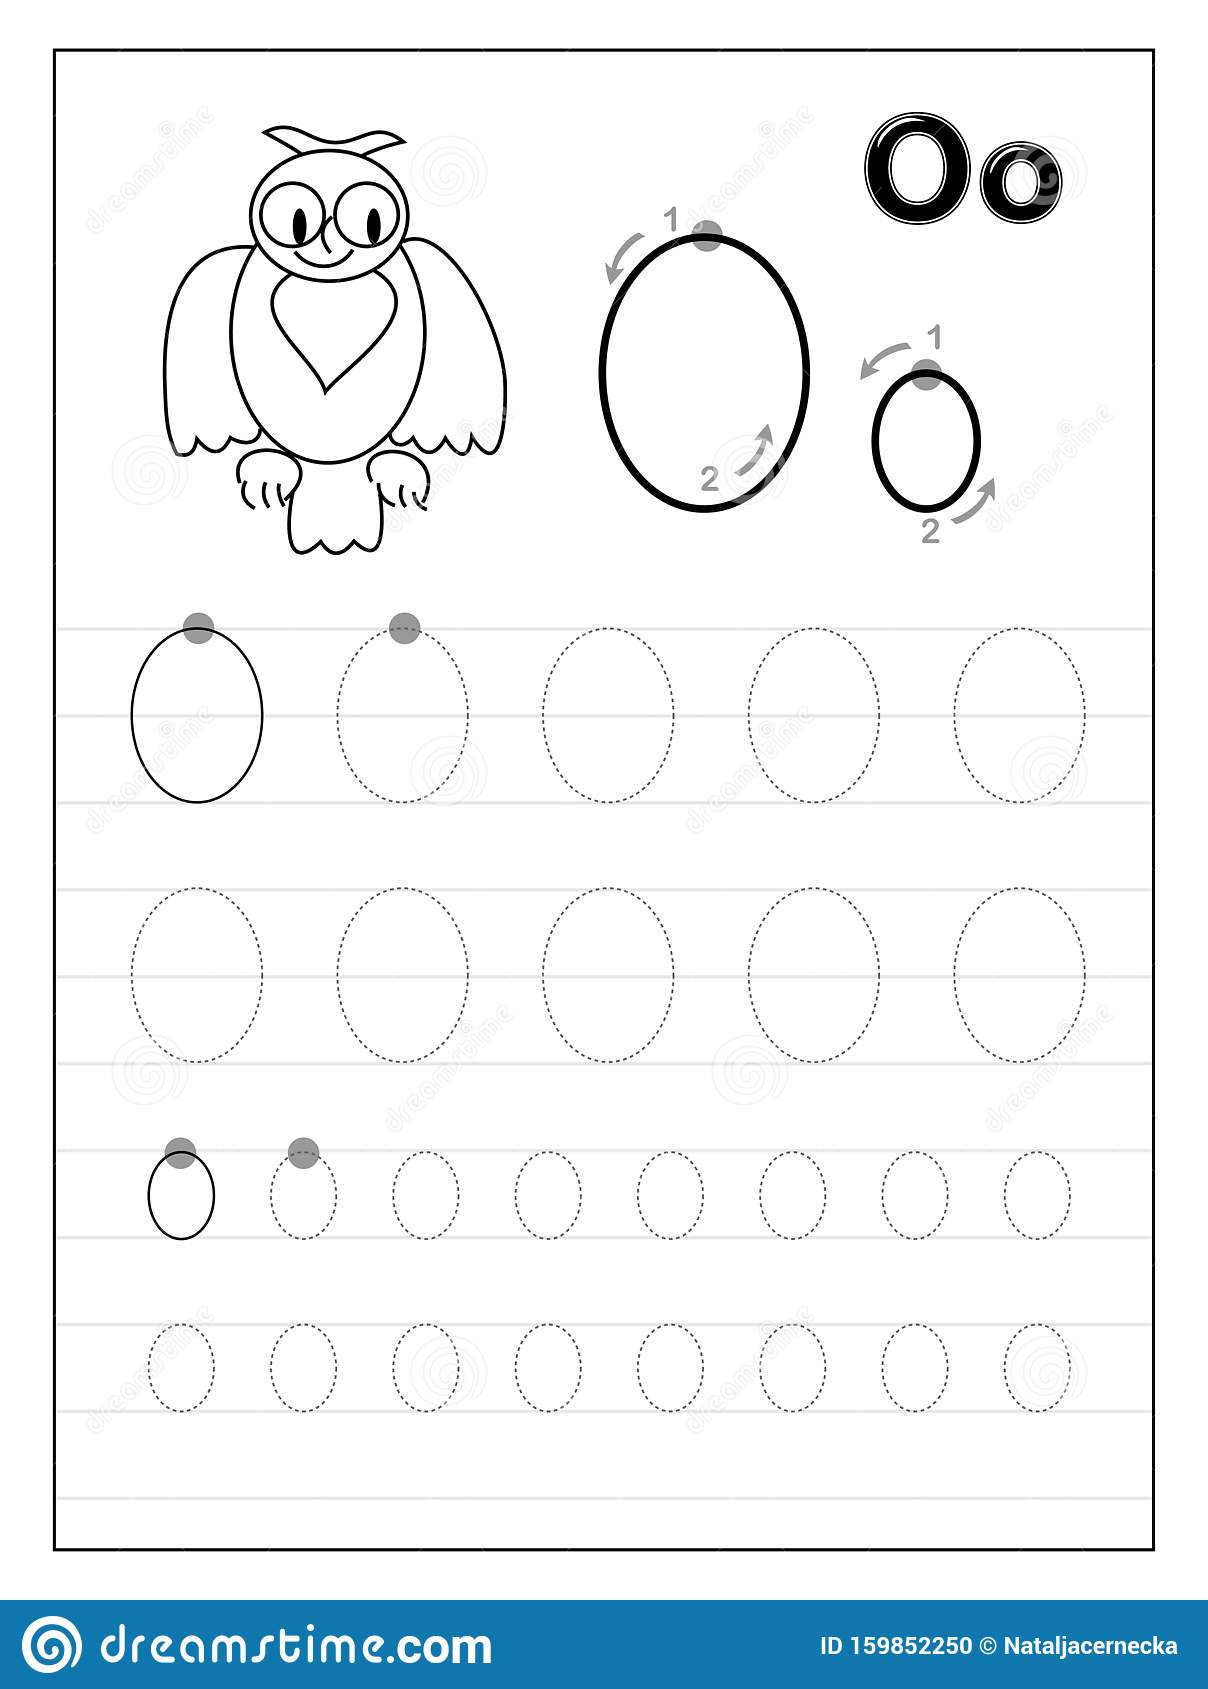 56 Printable Letter Tracing Photo Inspirations – Nilekayakclub with regard to Letter O Tracing Preschool